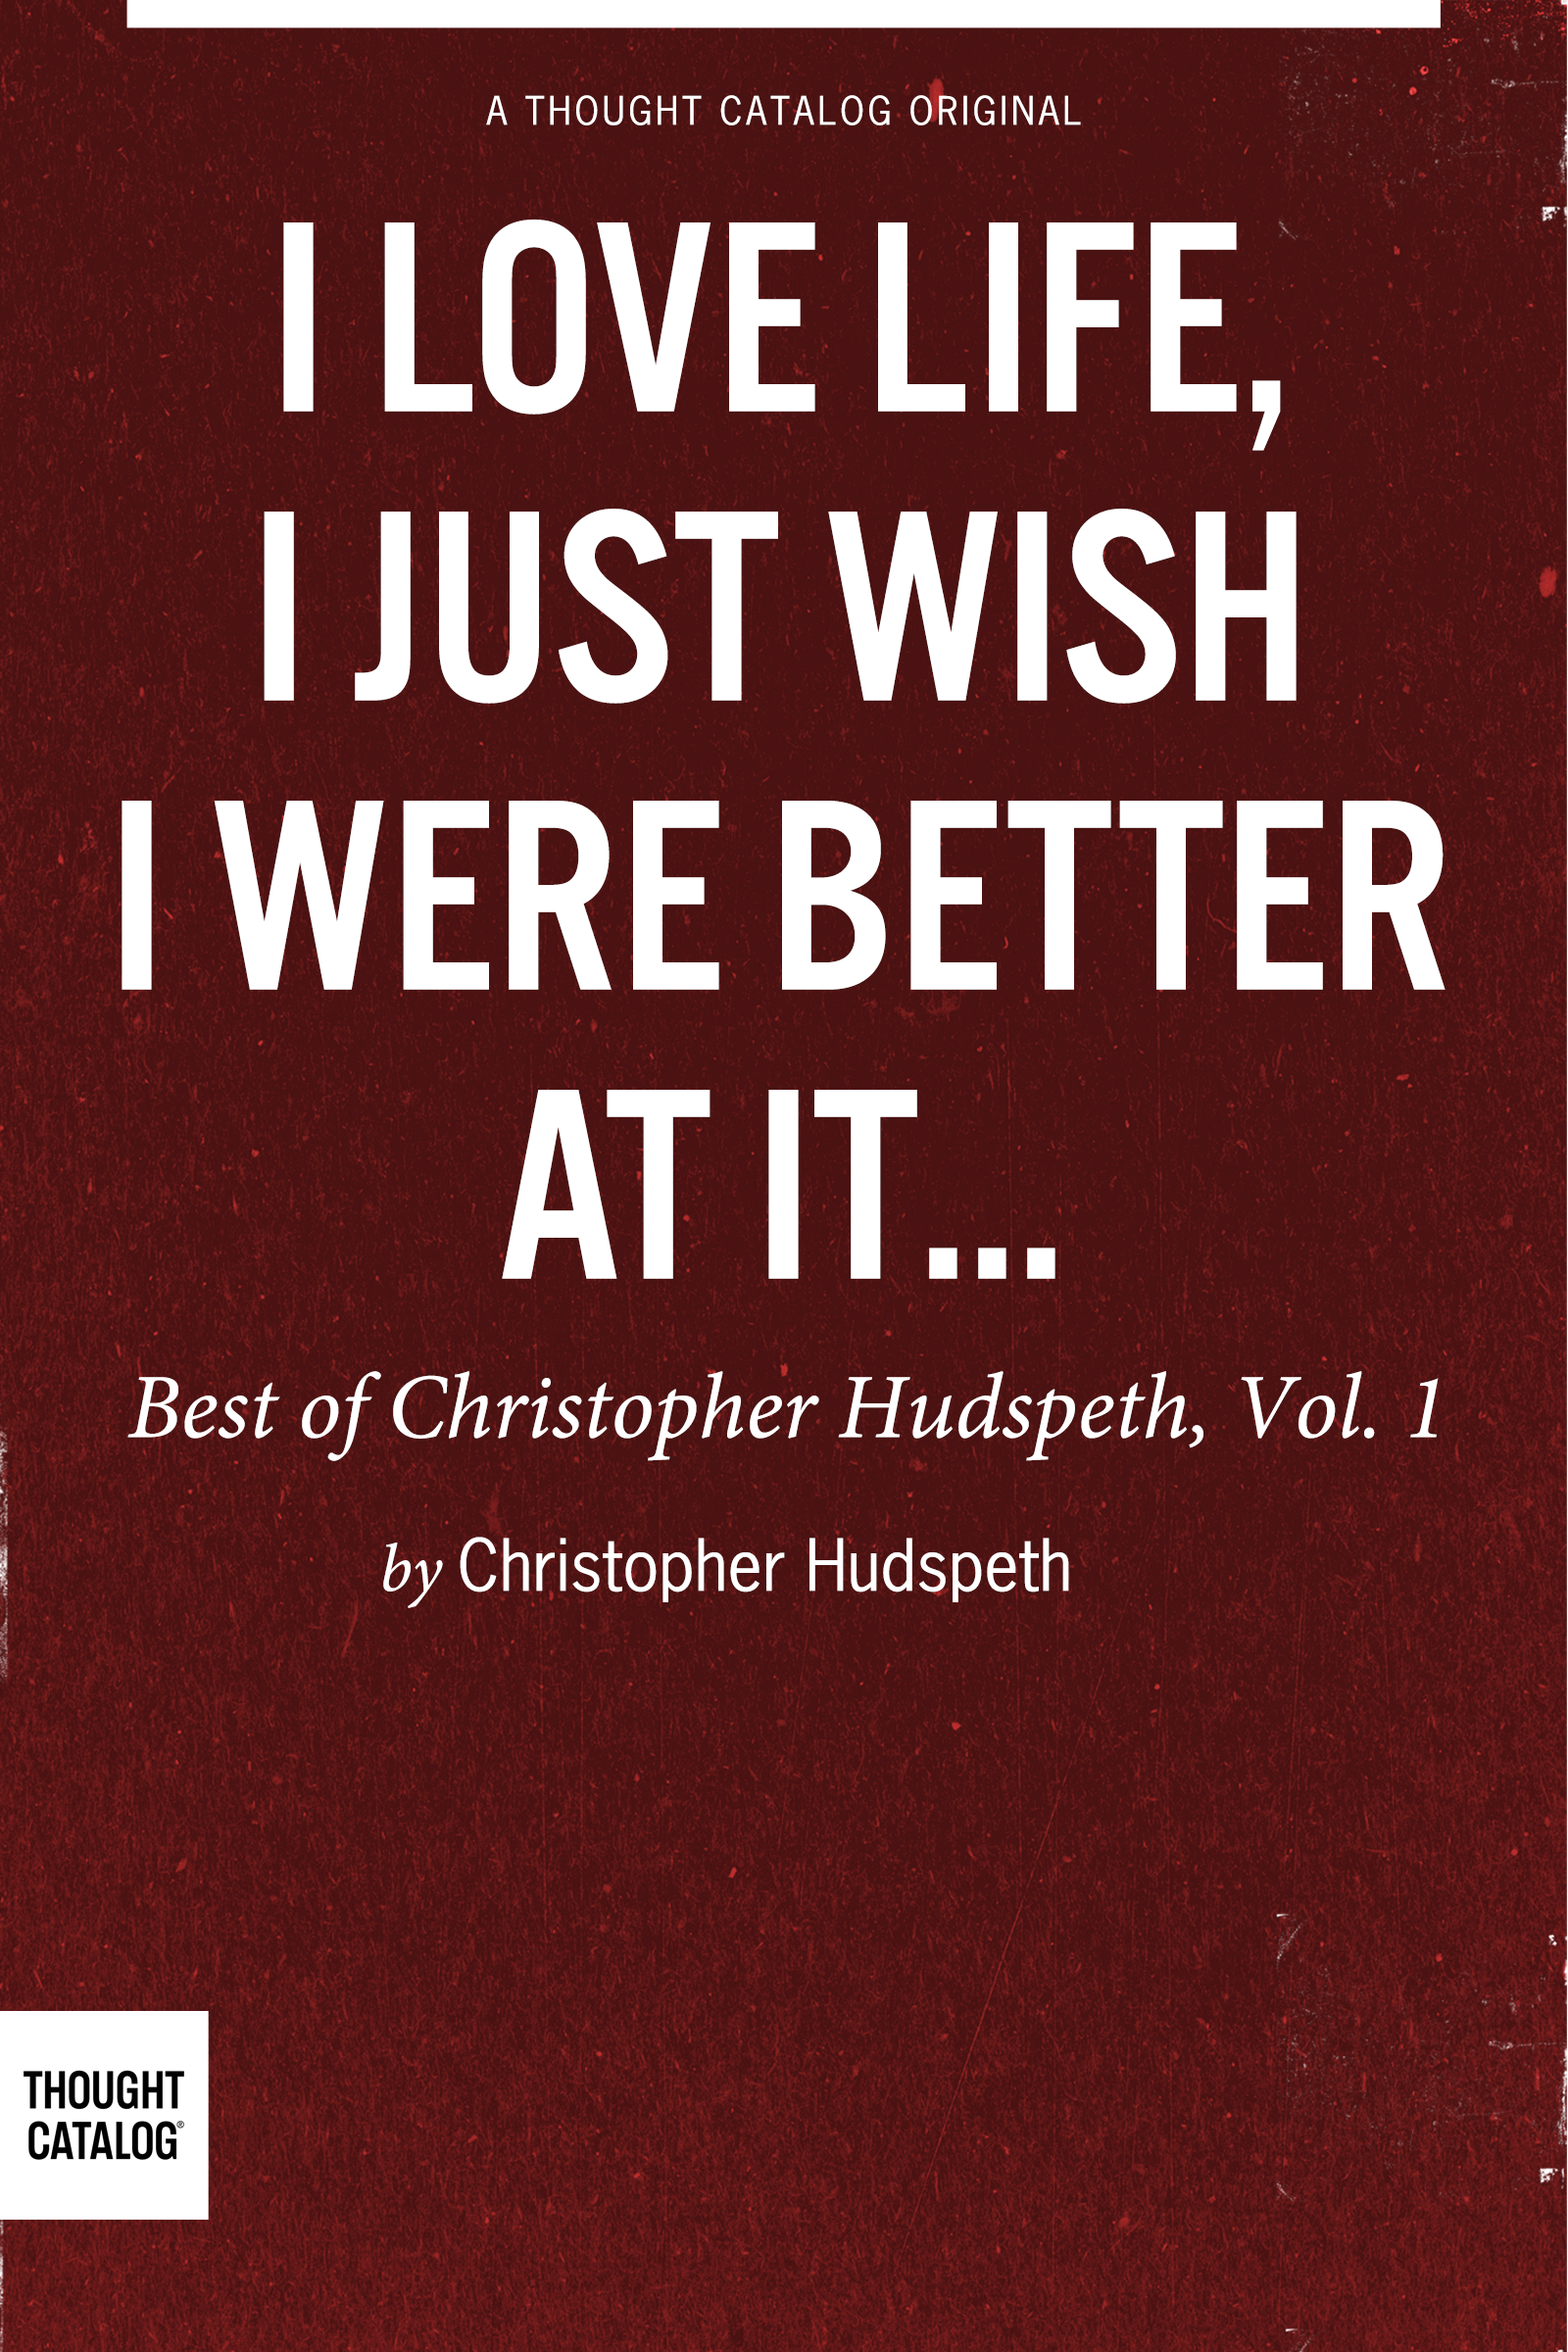 Buy "I Love Life, I Just Wish I Were Better At It: Best Of Christopher Hudpseth on Amazon, the iBookstore, and Vook (Outside the U.S.)